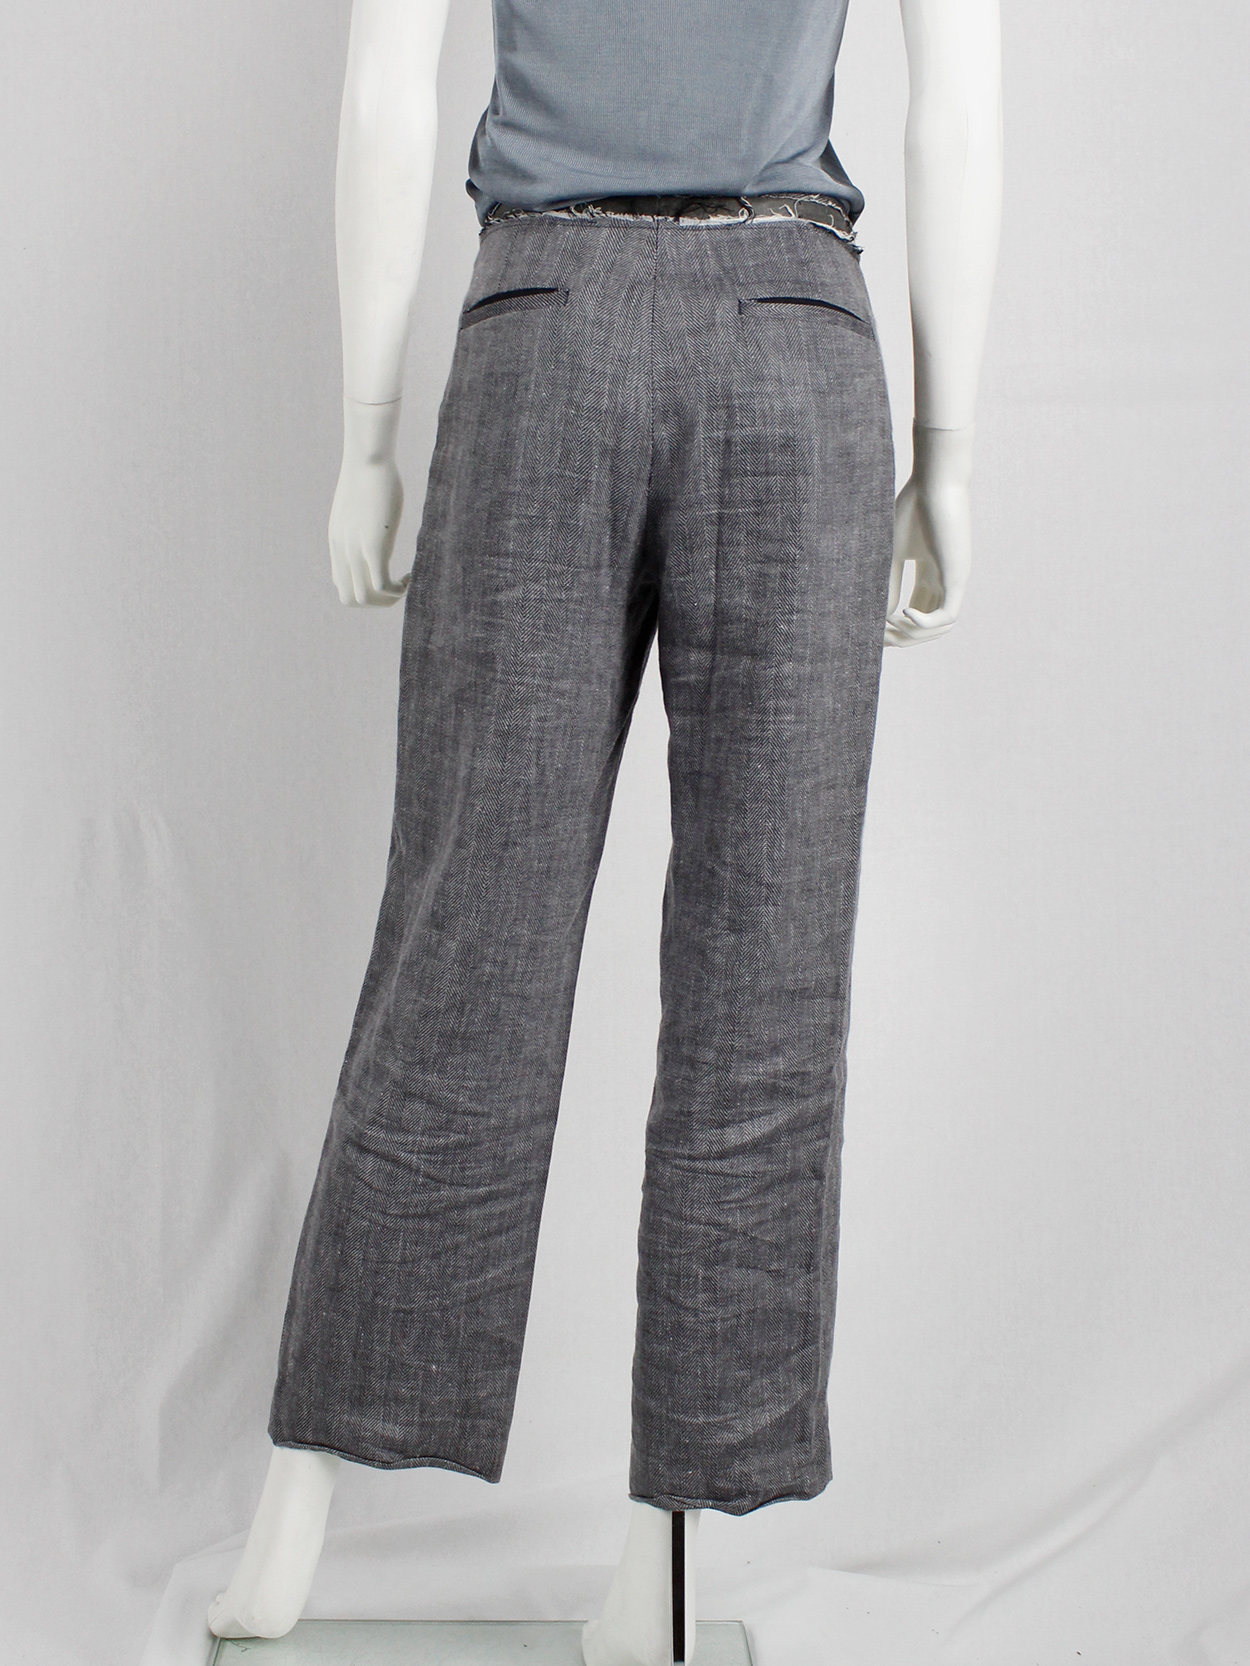 Maison Martin Margiela grey trousers with ripped waist and exposed lining spring 2005 (6)